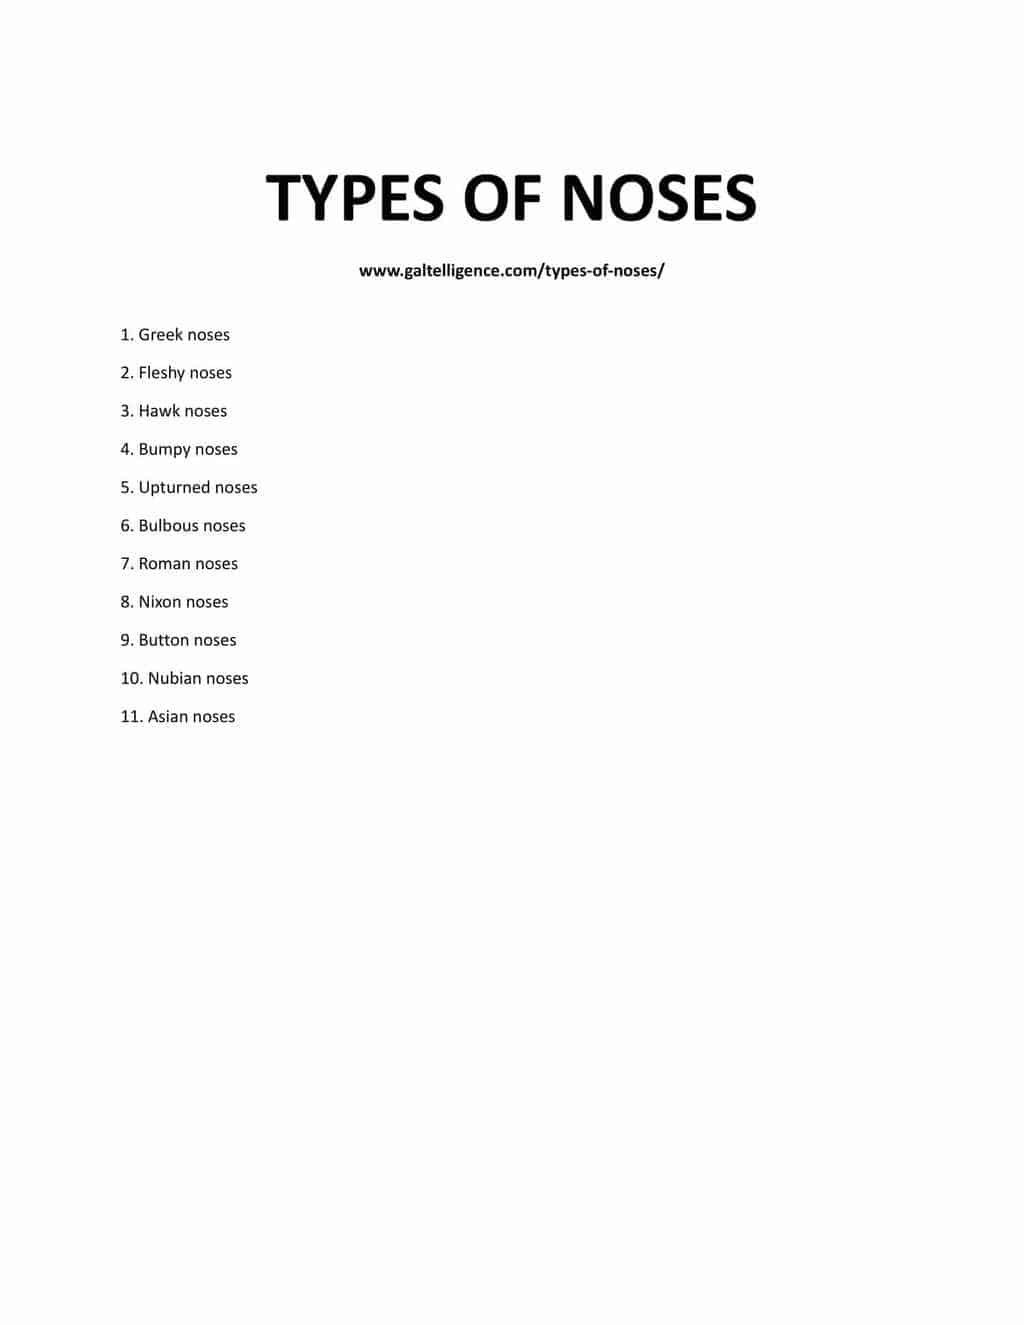 Downloadable and printable list of noses